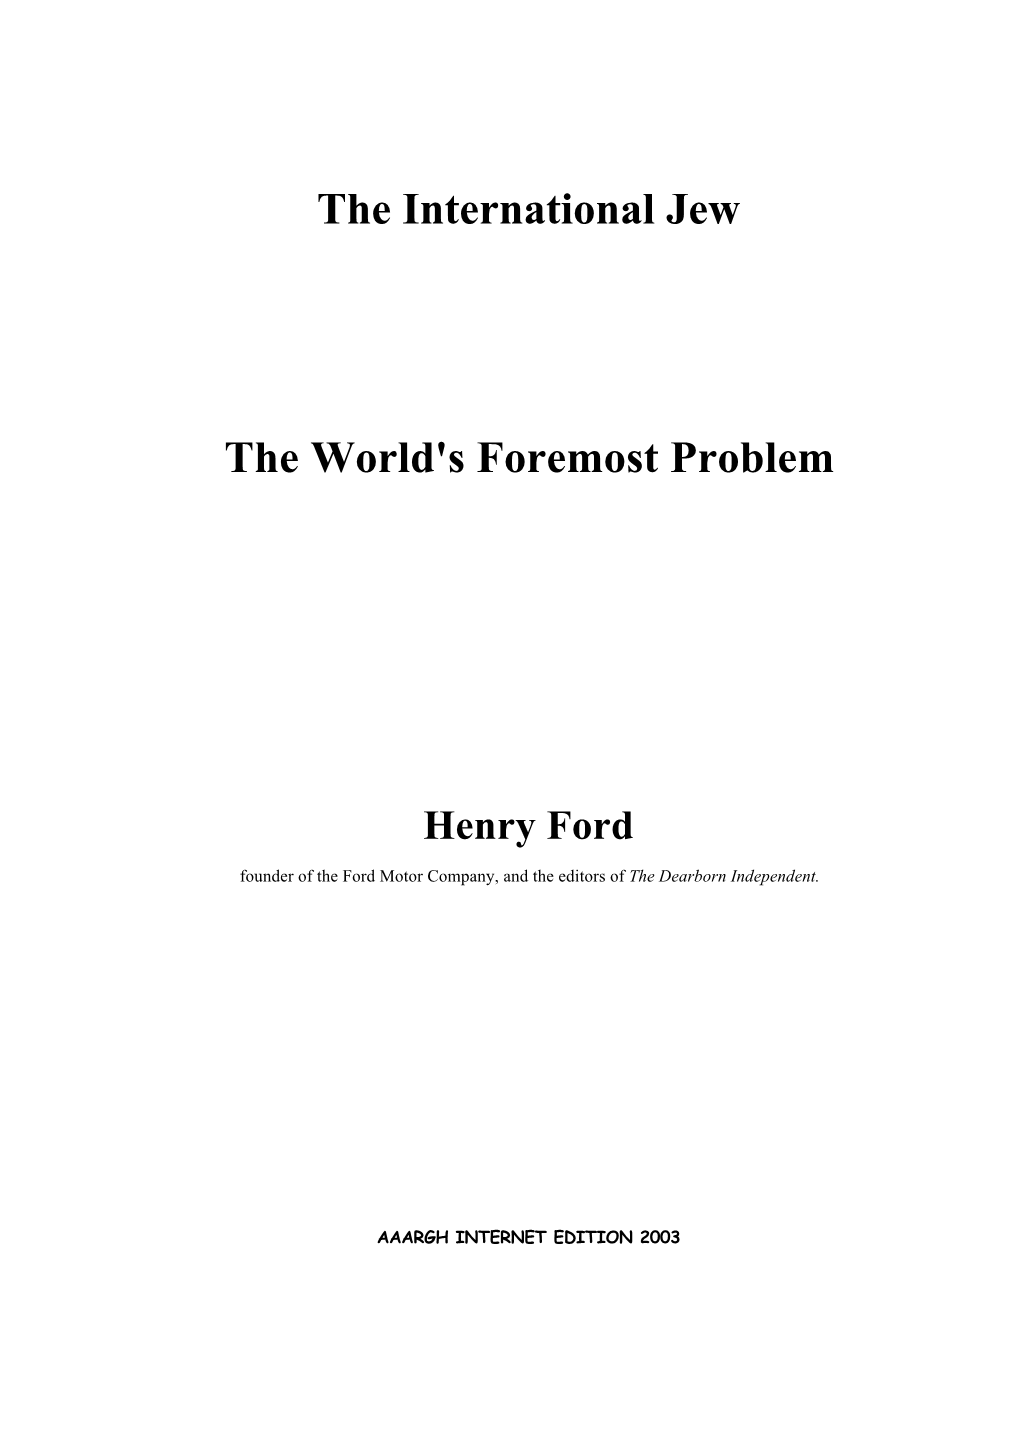 The International Jew the World's Foremost Problem Henry Ford